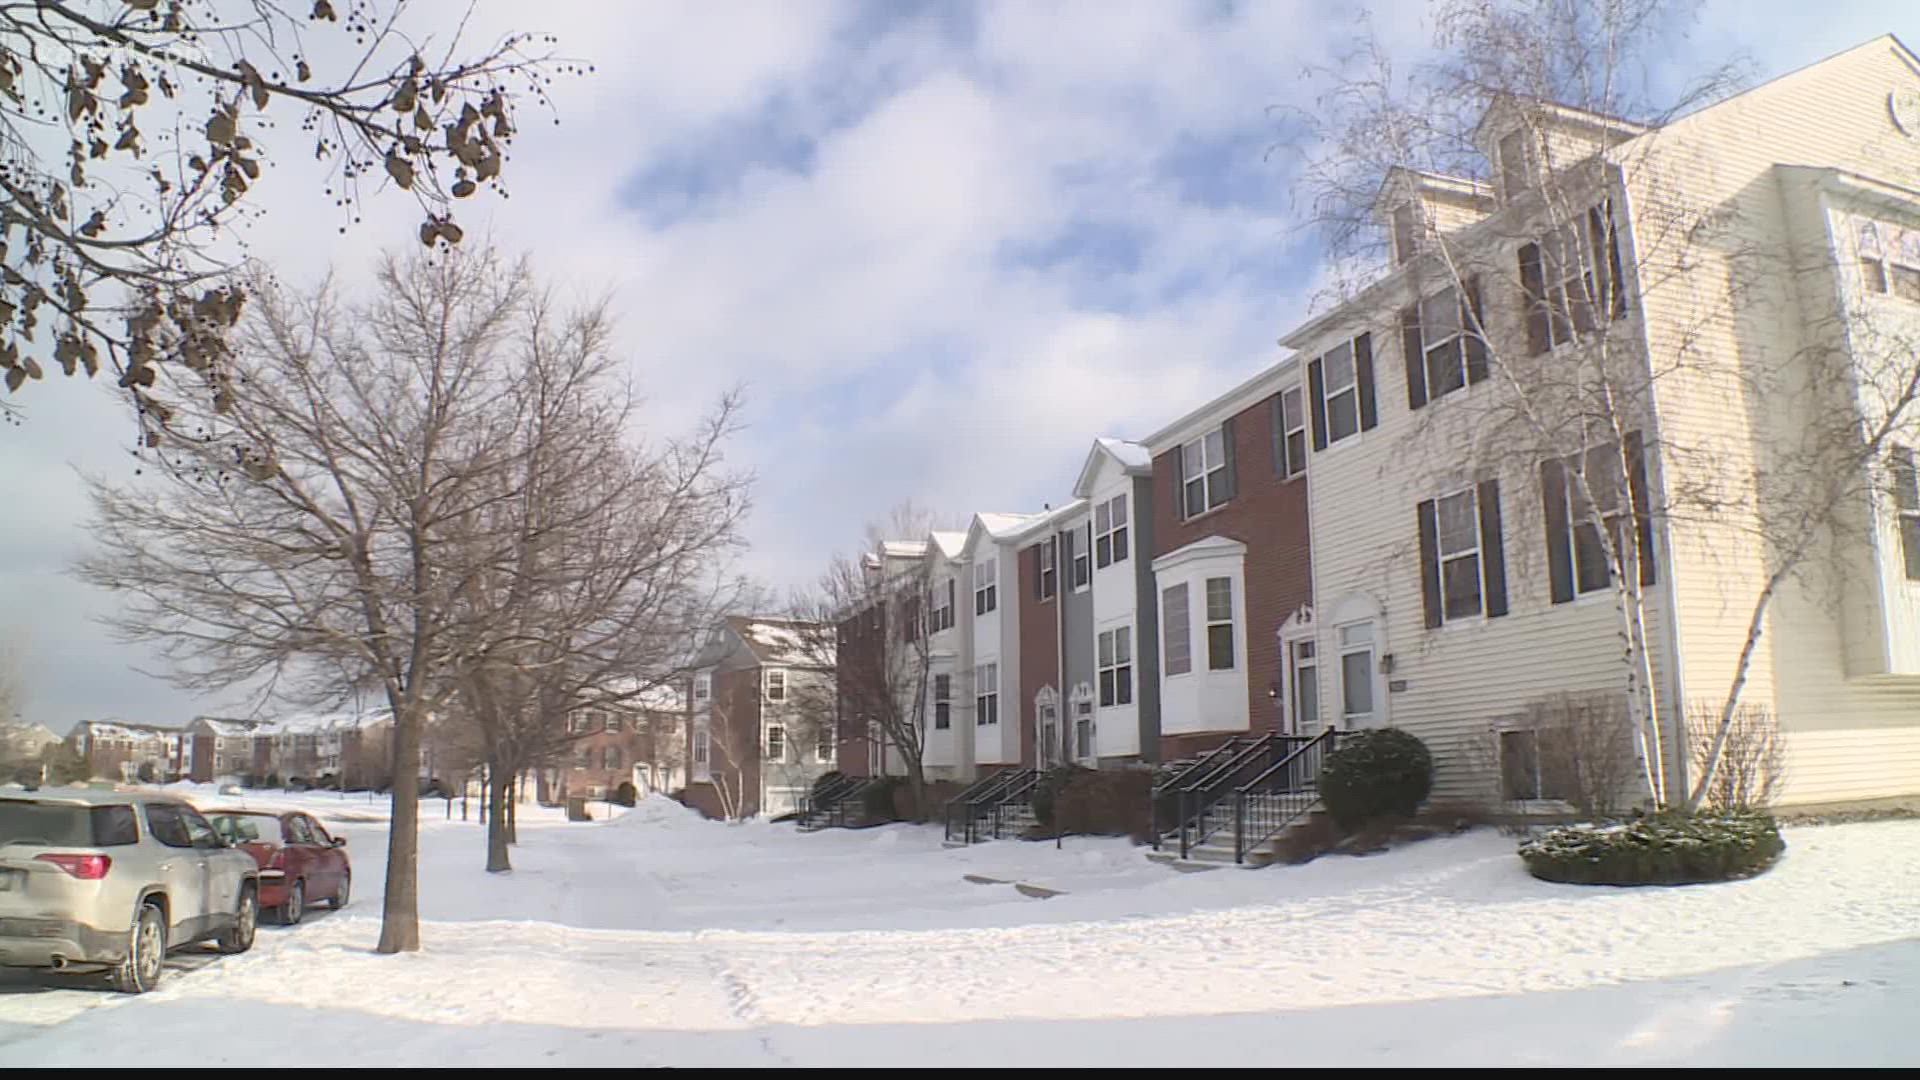 A spokesperson said a resident of a townhome called 911 to report three people were sick. Everyone was found to have moderate levels of carbon monoxide poisoning.